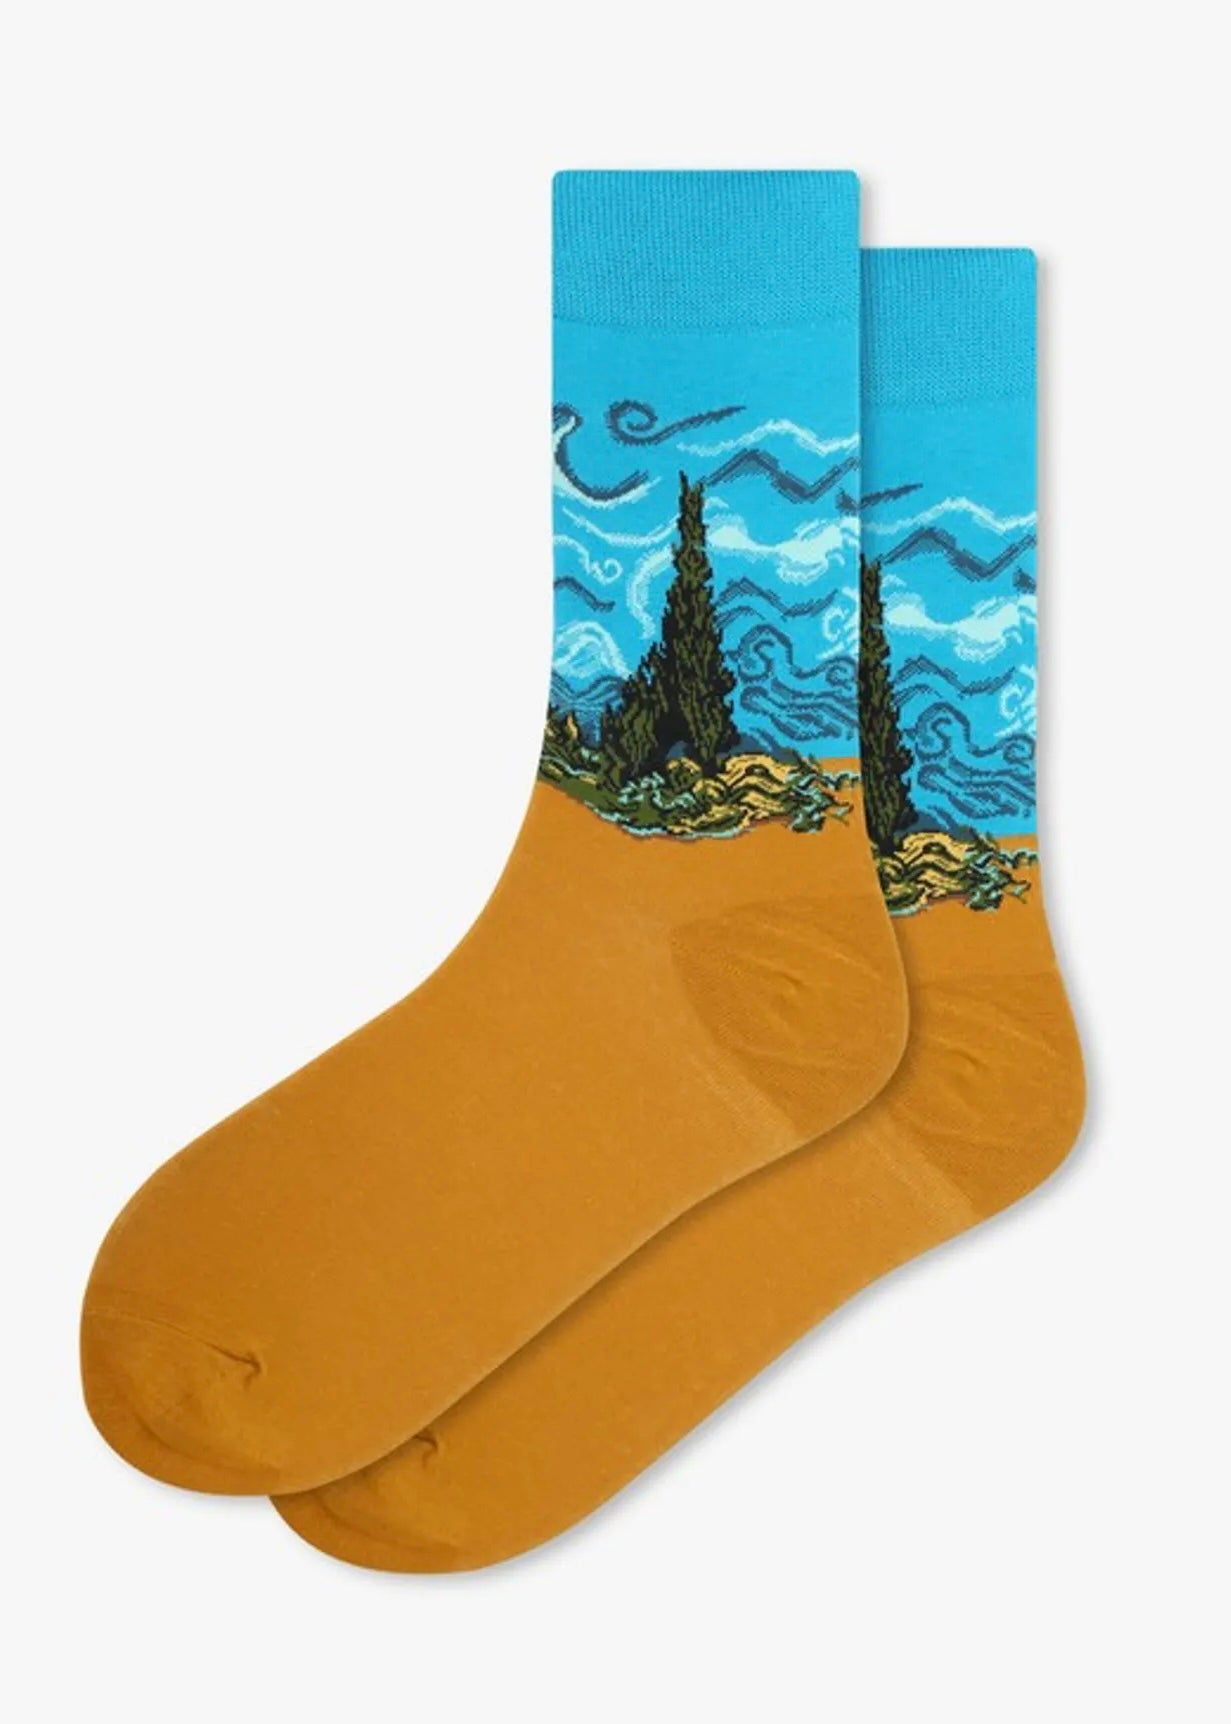 *The Masters Socks - The Wheatfield with Cypresses